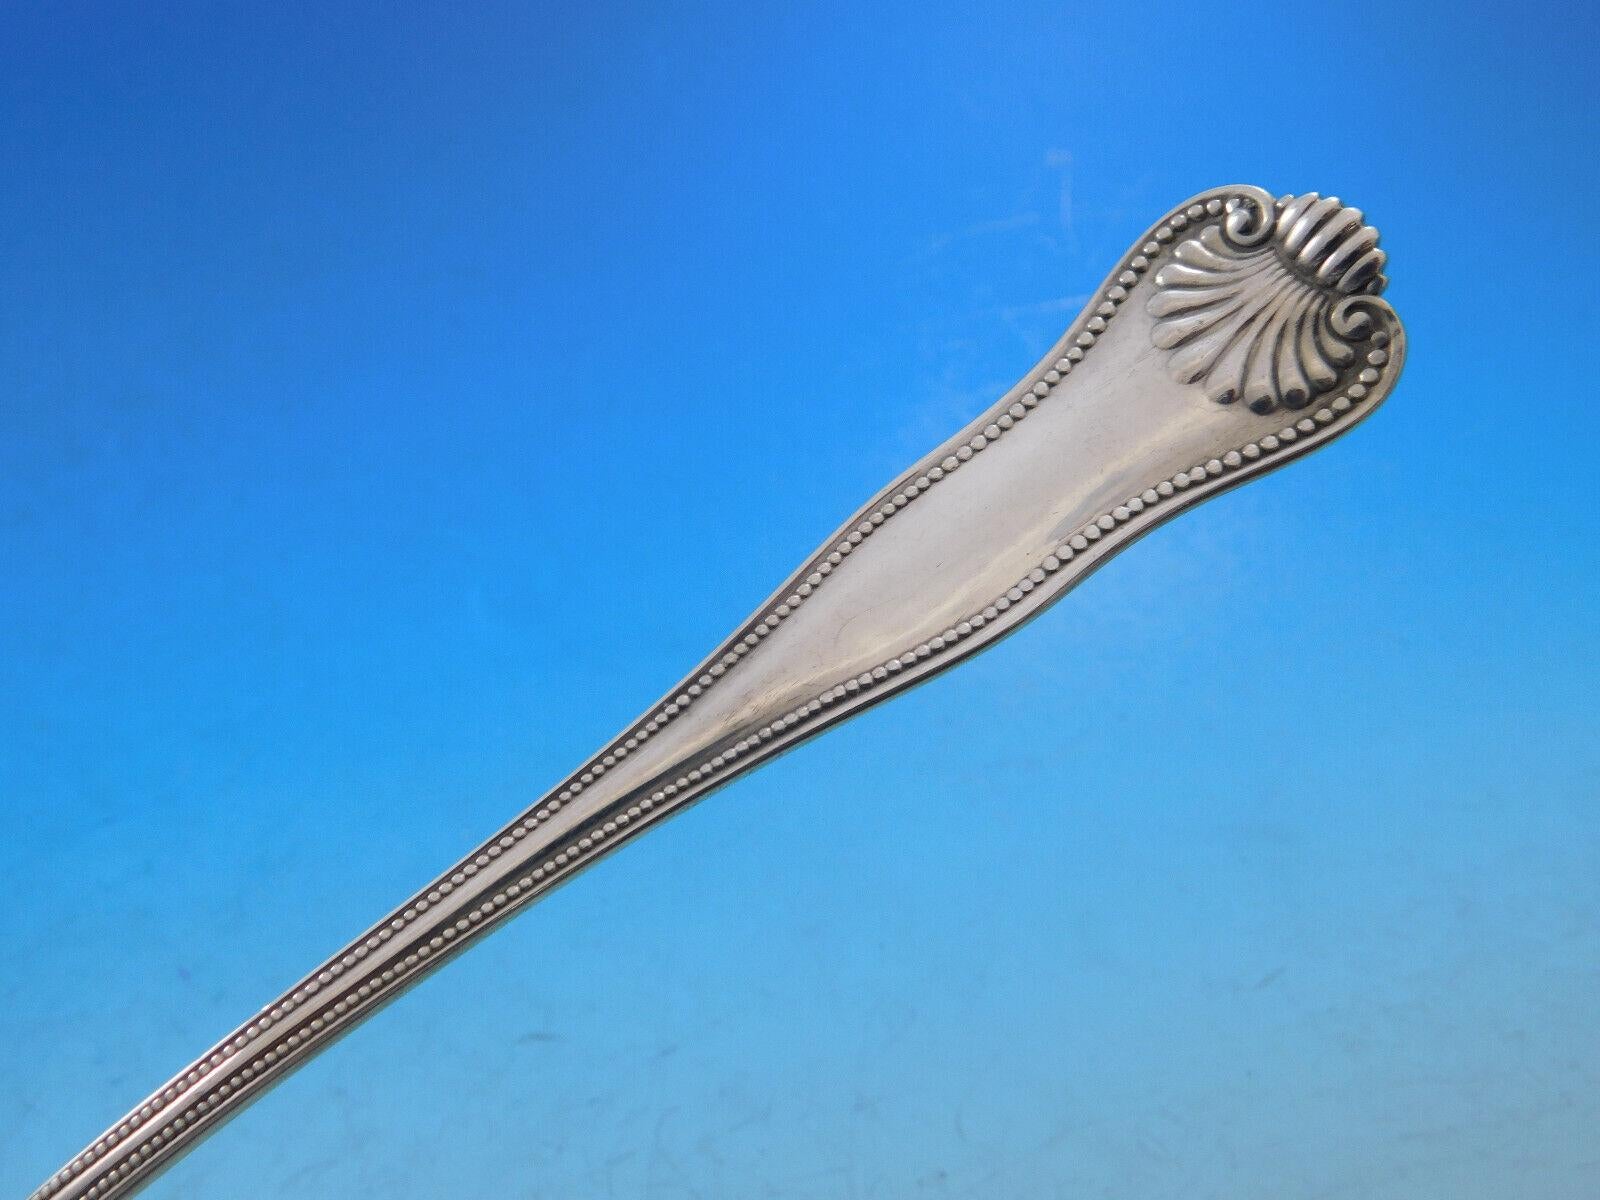 Monumental Newport shell by Frank Smith sterling silver flatware set, 101 pieces. This pattern was introduced in the year 1910 and features a shell motif with a beaded edge. This set includes:

12 dinner knives, French blades, 9 3/4